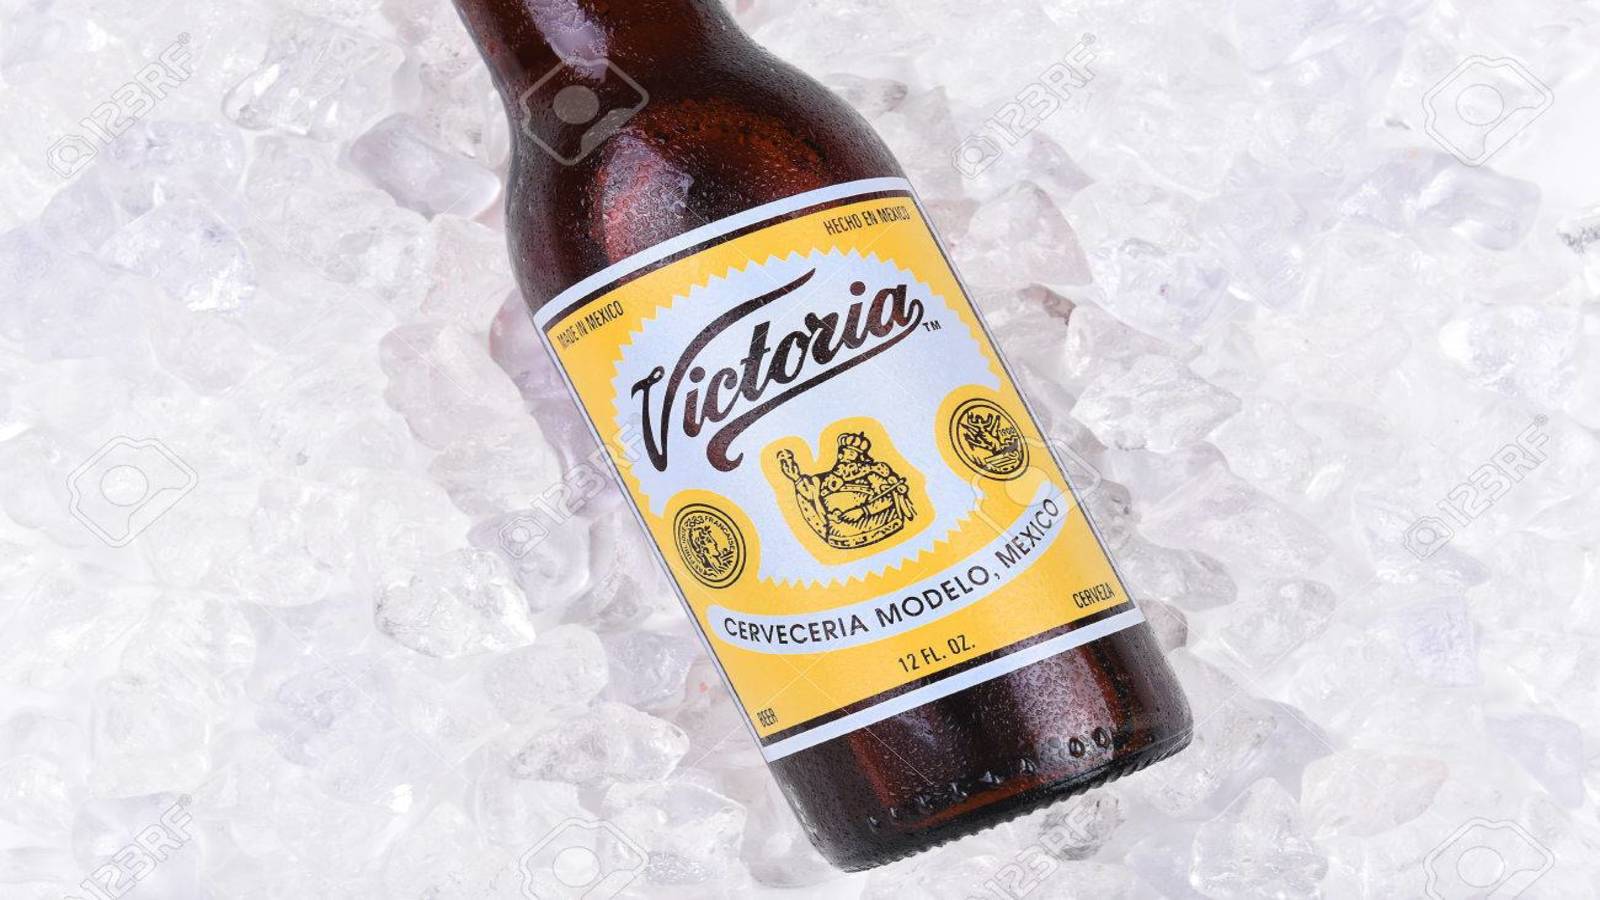 Constellation’s Victoria beer selected to be official beer of SummerSlam